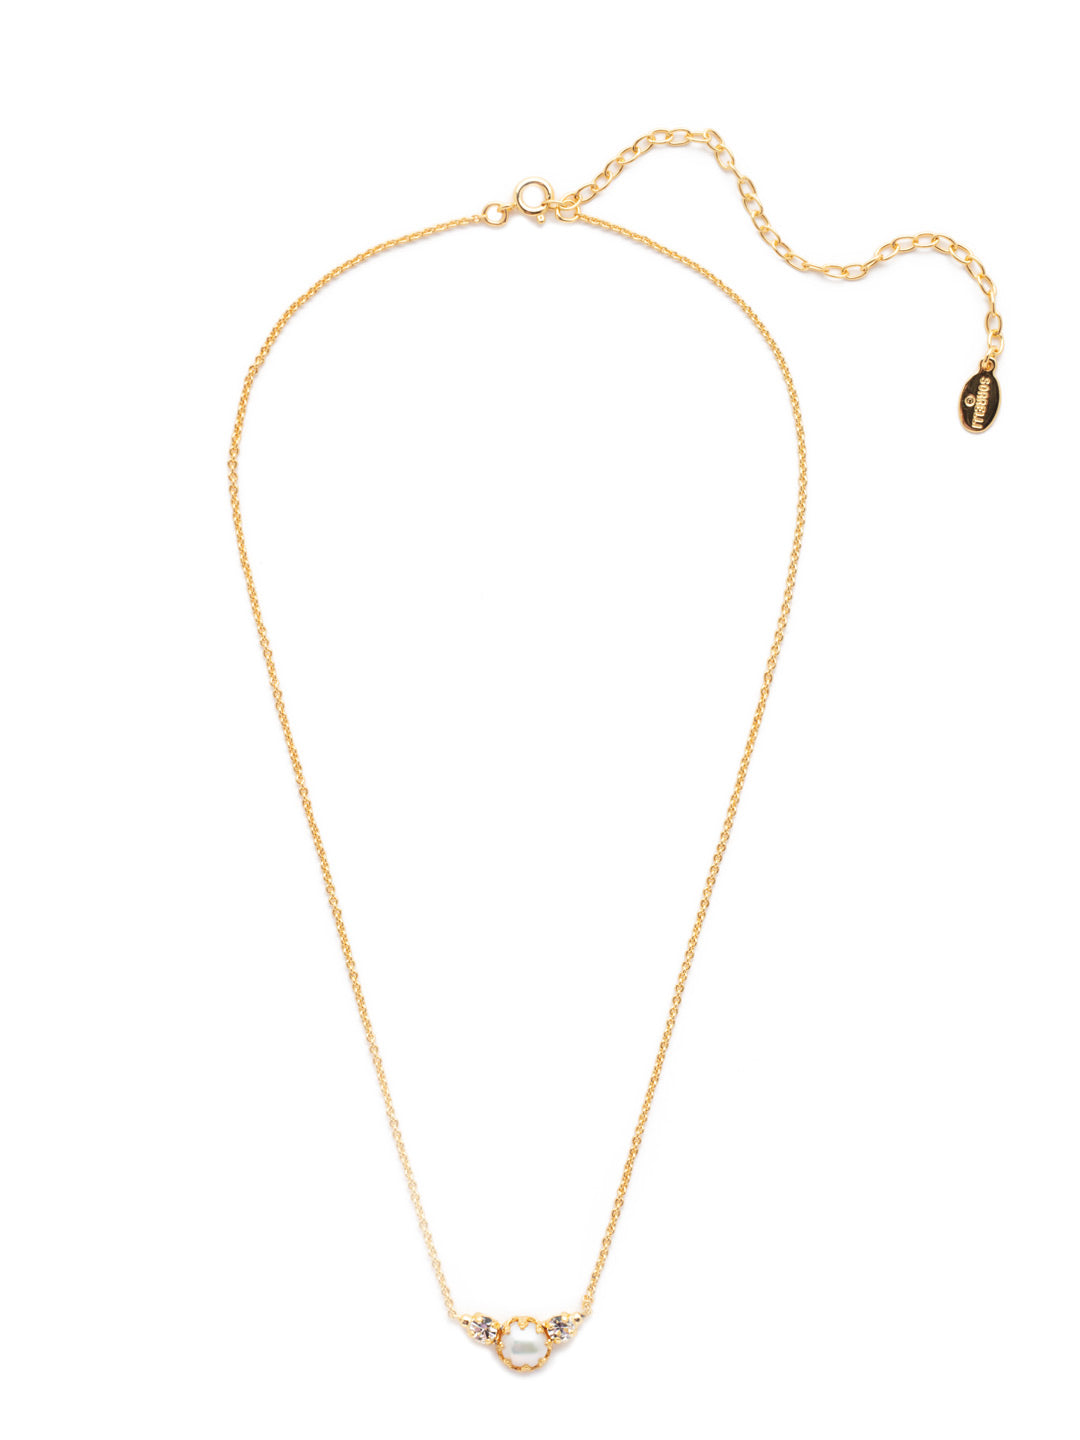 Kit Pendant Necklace - NEV119BGCRY - <p>The Kit Pendant Necklace features a single freshwater pearl nestled between two sparkling crystals. The dainty design makes it perfect for everyday wear! From Sorrelli's Crystal collection in our Bright Gold-tone finish.</p>